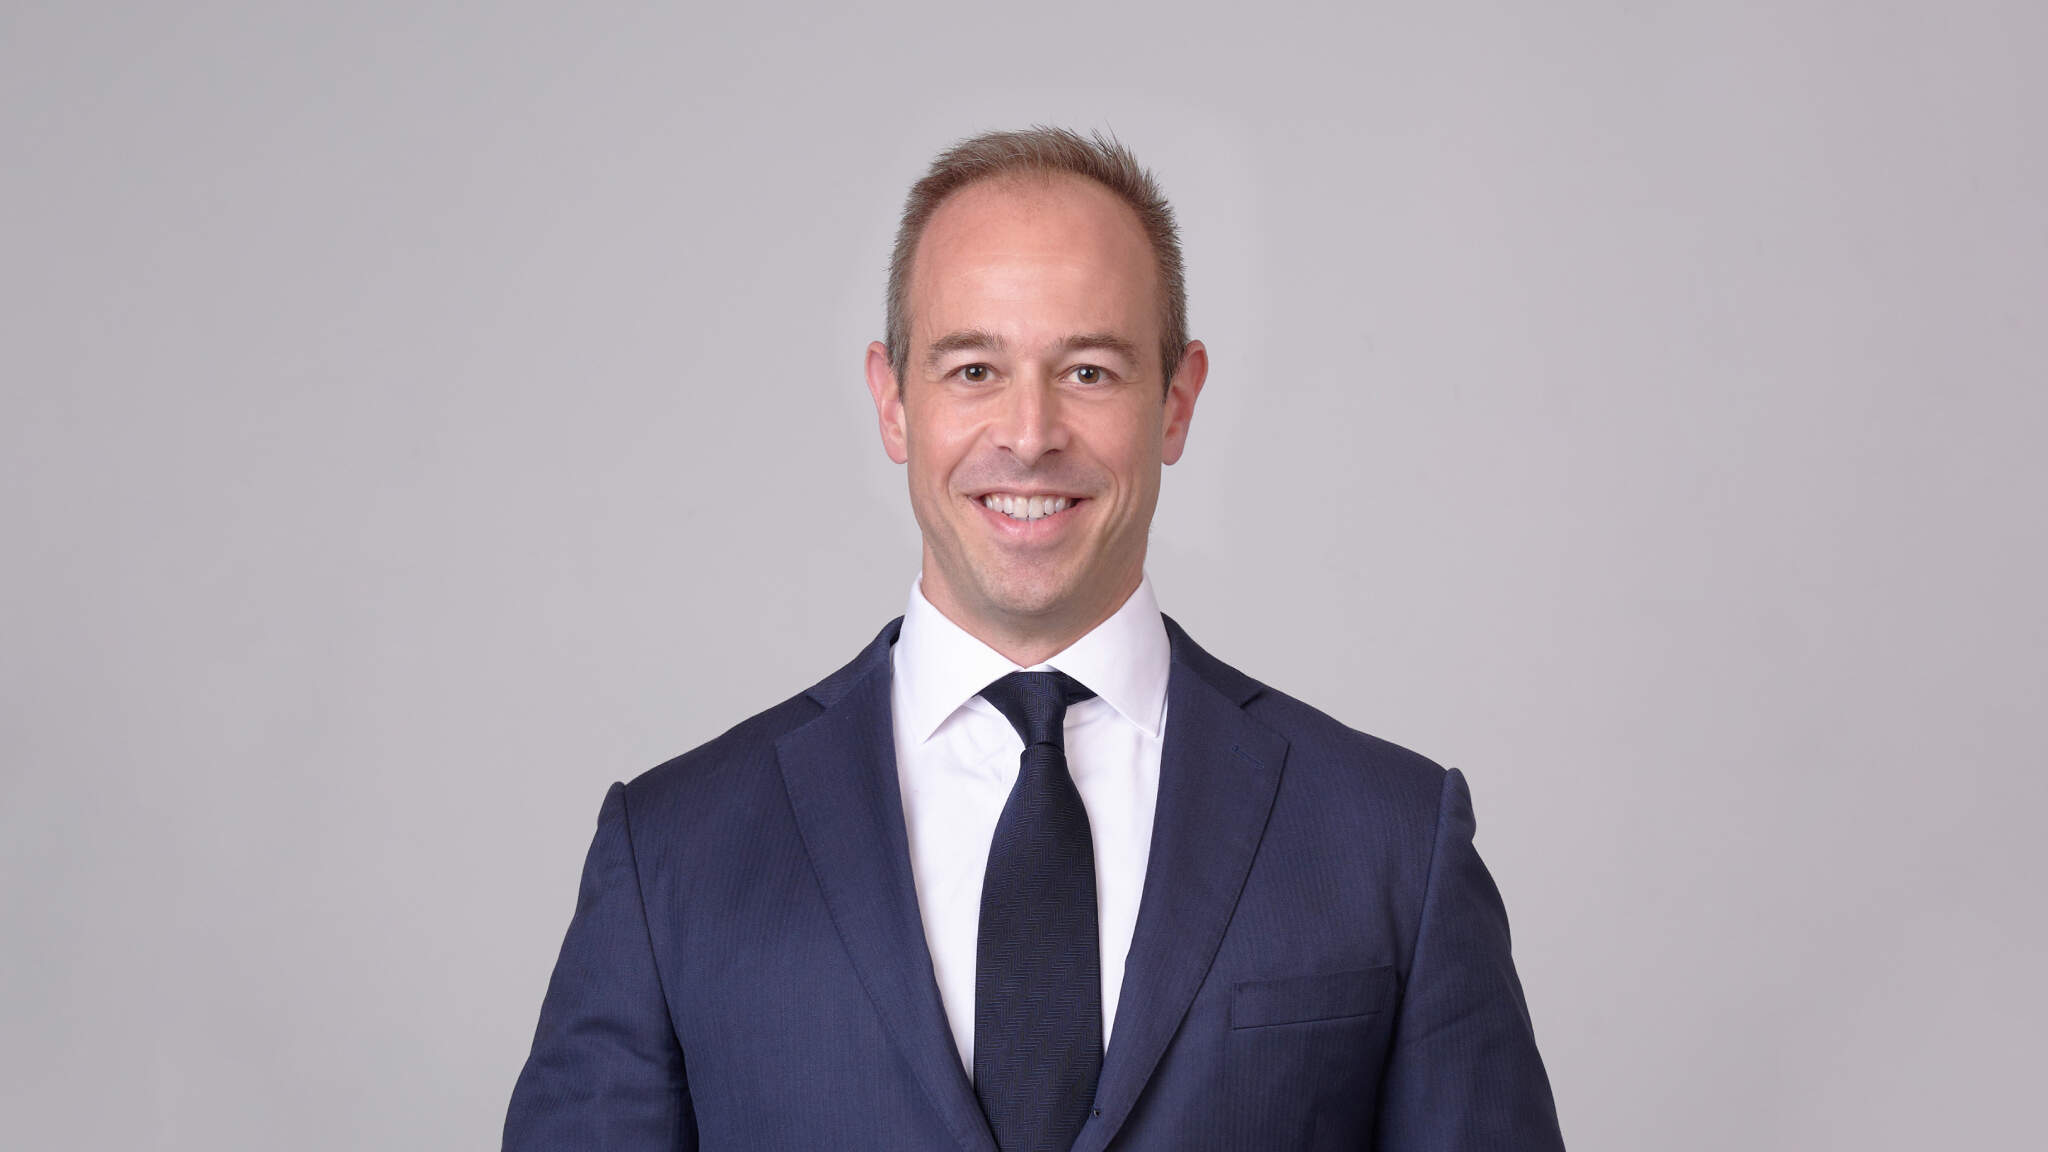 Roman Mueller assumes role of Managing Director for DACHSER Air & Sea Logistics Asia Pacific